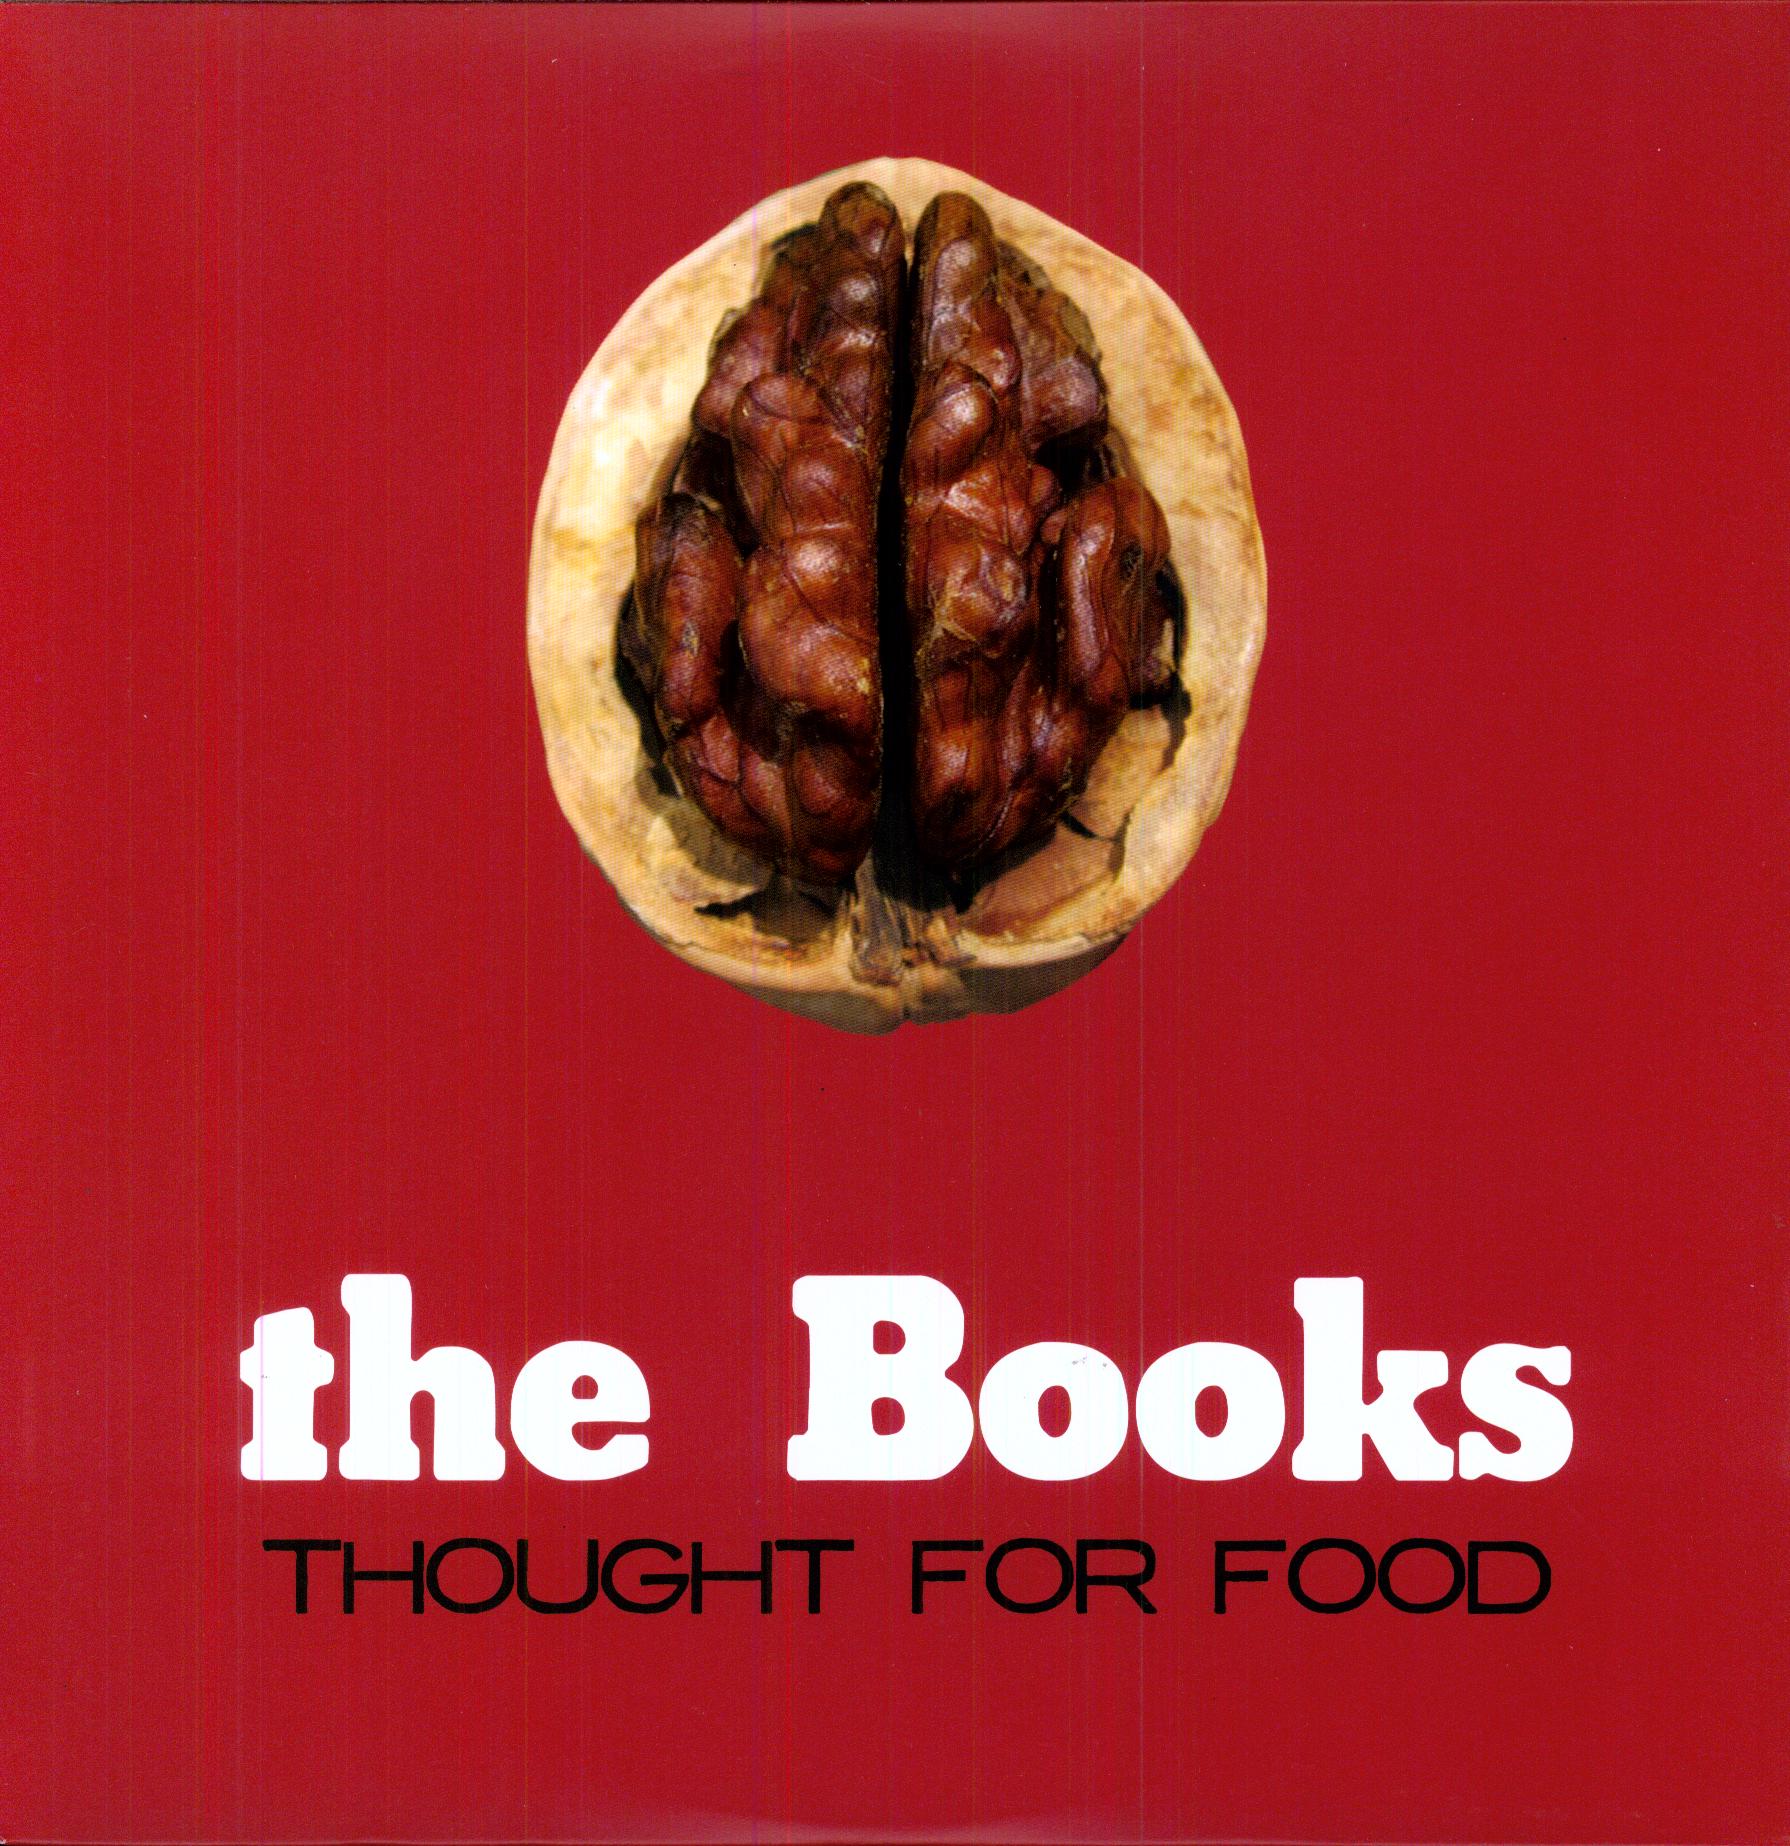 Book of thoughts. The books - thought for food (2002). Mm. . . Food LP.